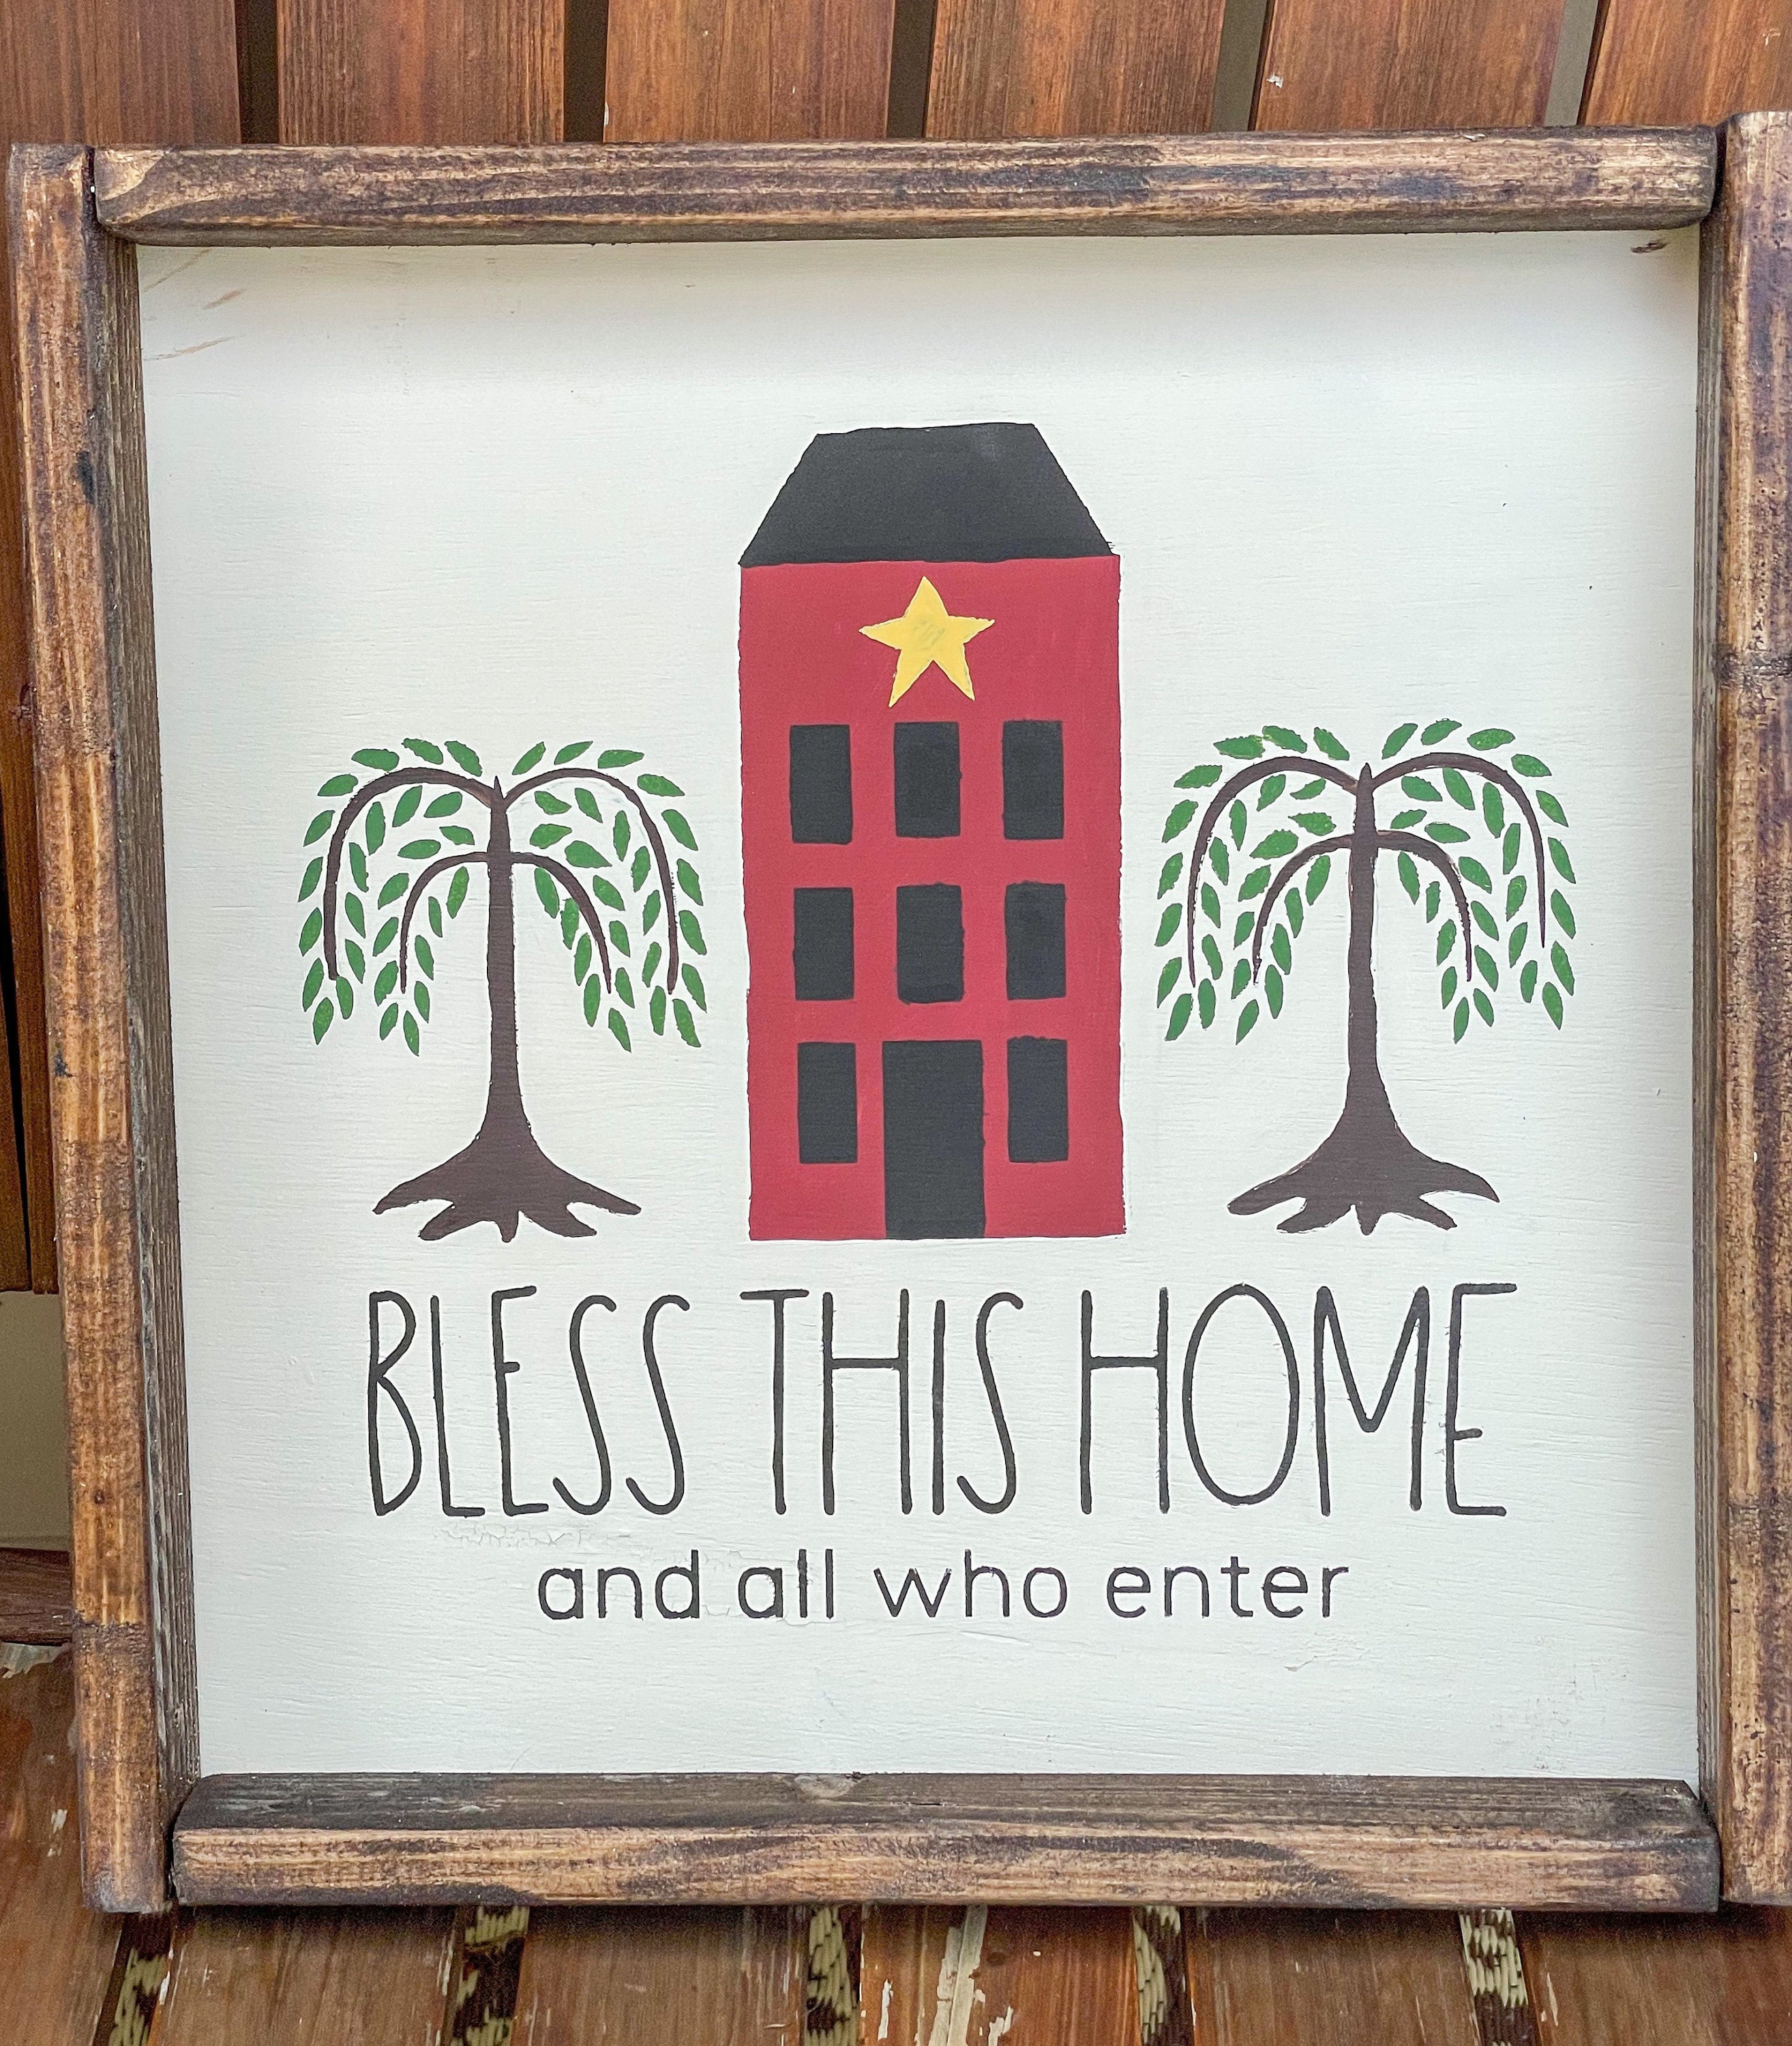 Joanie Stencil Homespun Blessings Willow Tree Saltbox House Family Prim Signs 